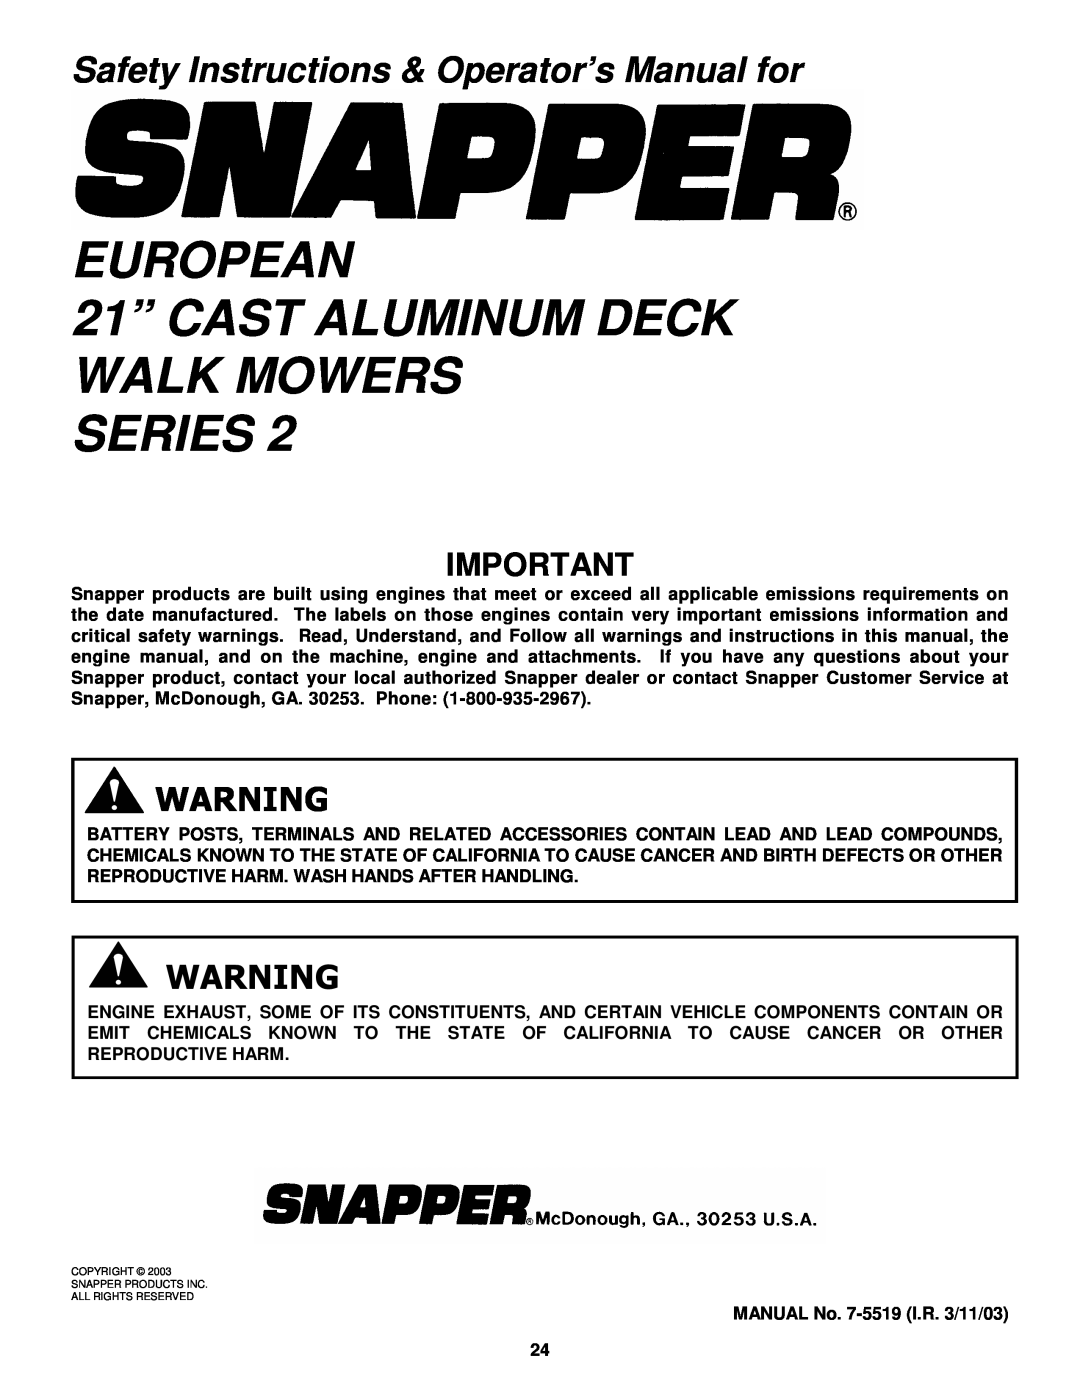 Snapper ELP21702BV EUROPEAN 21” CAST ALUMINUM DECK WALK MOWERS, Series, Safety Instructions & Operator’s Manual for 